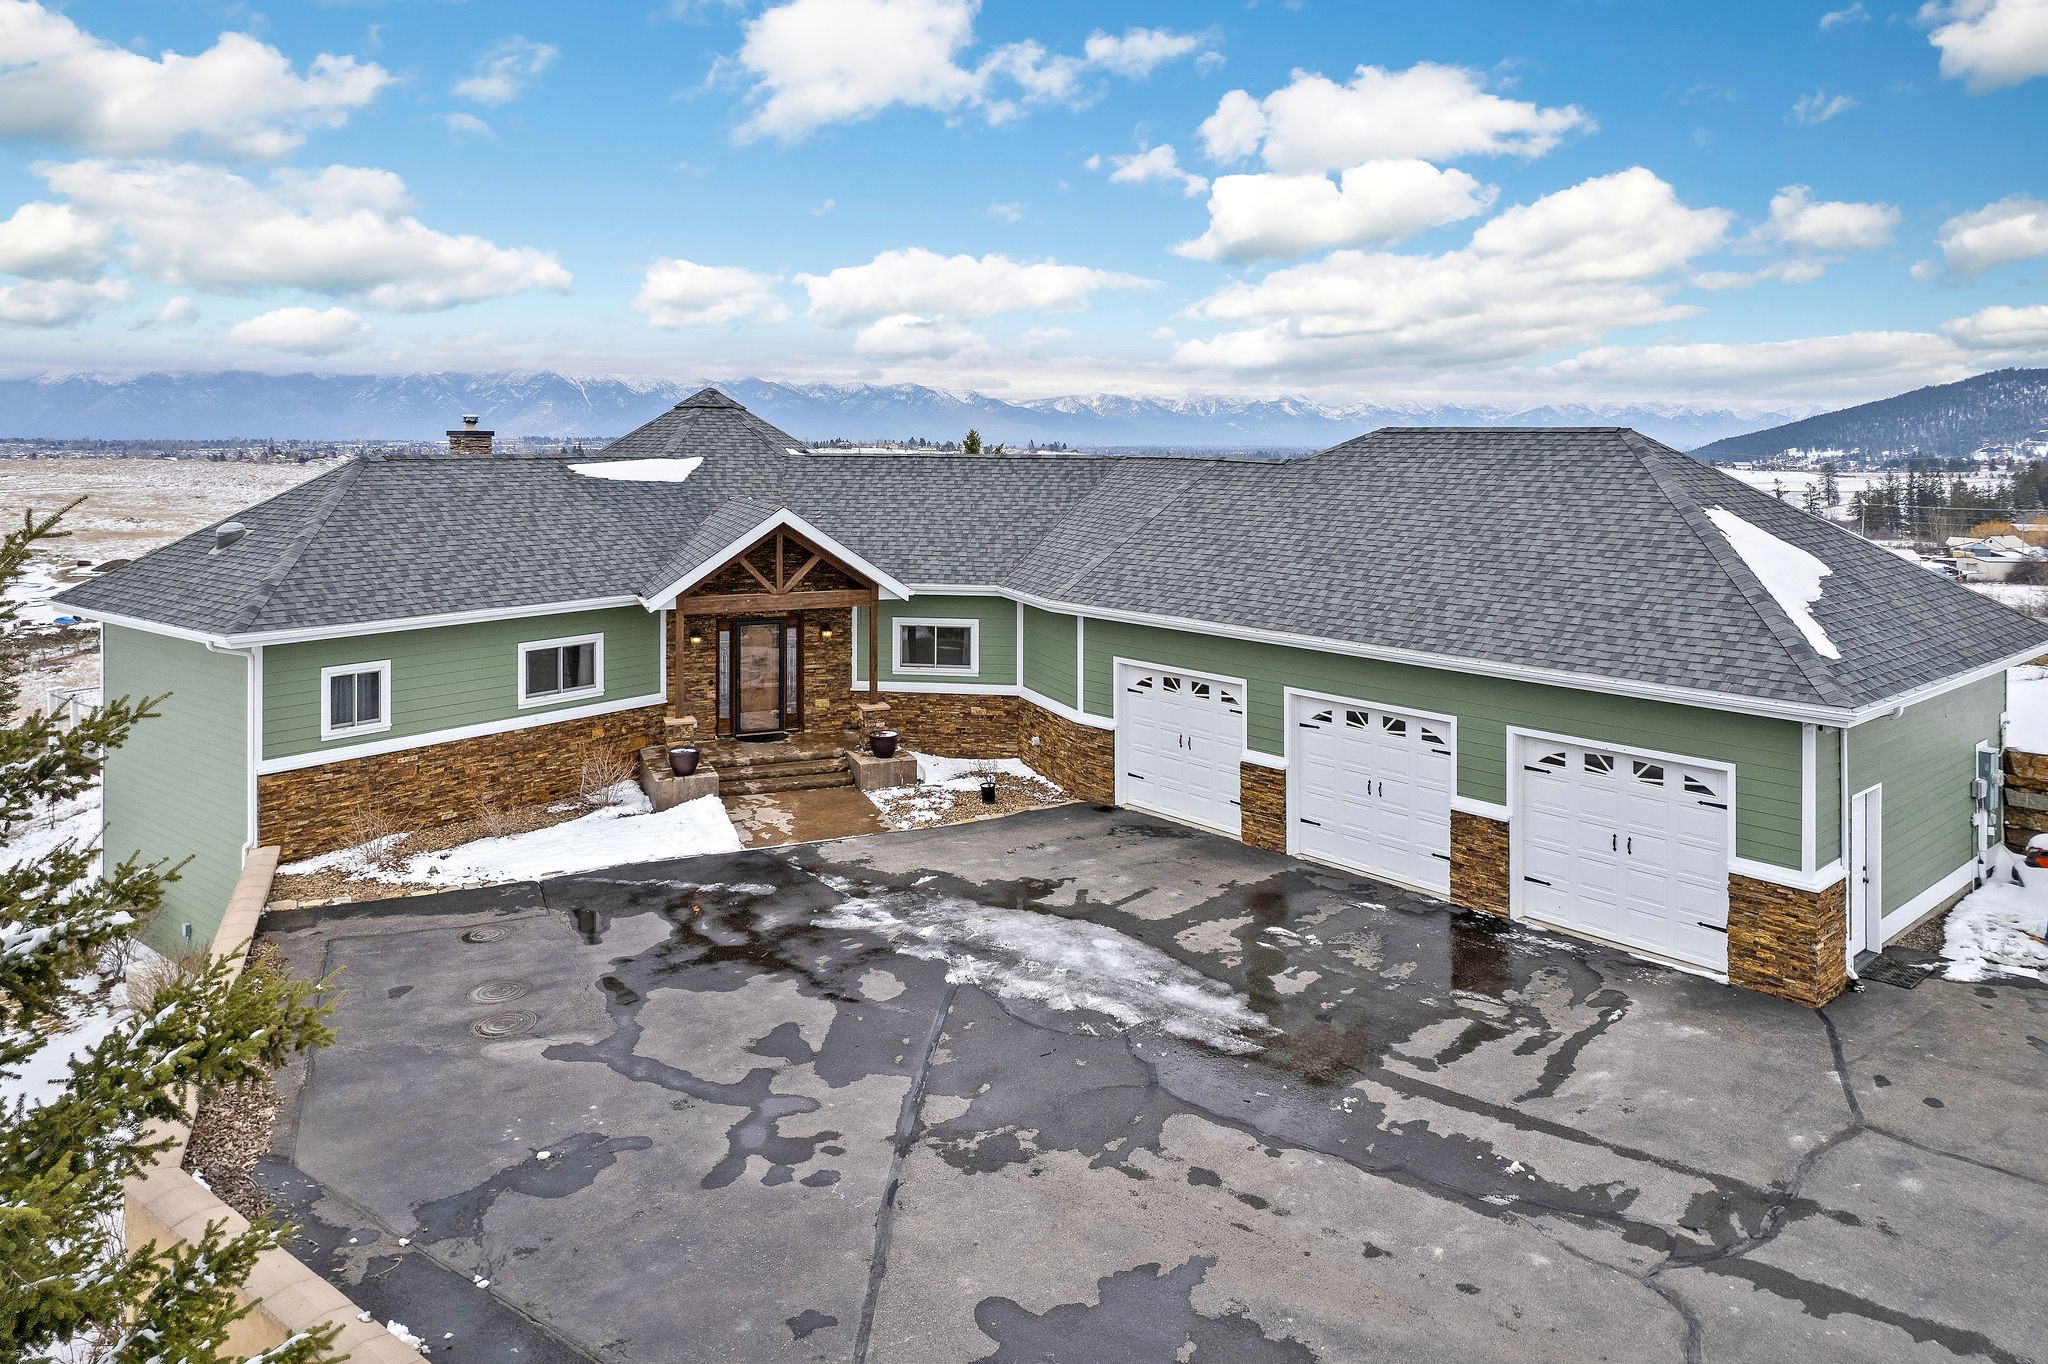 Located in the serene Ashley Hills with panoramic views stretching from Whitefish Mountain to Glacier National Park, Columbia Mountain, and the Swan Range. This captivating 3-bedroom, 3-bathroom ranch-style home, built in 2006, sprawls across 4,056 square feet on a generous 1.65-acre lot. The heart of the home is a stunning kitchen with hickory cabinets, under cabinet lights, and a water treatment system. The living room, bathed in natural light from large windows, features ambiance lighting and a unique rock gas fireplace that seamlessly connects to the primary bedroom. This bedroom is a true retreat, boasting a sliding door to the deck, a minisplit for perfect climate control, an ensuite with double vanity, jacuzzi tub, skylights, and a spacious walk-in closet. The house's interior is further enhanced by radiant heat with 9 zones, creating a comfortable environment throughout, and tile flooring that combines elegance with ease of maintenance. The property also includes a large entertainment room in the walk-out basement, complete with a wood stove and new carpet. Practicality is not overlooked, with a pristine utility room, washer and dryer hookups in the basement, and ample storage options, including large double closets in the basement bedroom. This home is wired with speakers throughout, ensuring entertainment and ambiance in every room. Outdoor living is equally impressive, with a covered patio featuring natural gas hookups for a grill, a wraparound Trex deck, a 7x7 storage shed, and RV parking with power hookups. 3 stall garage with 220 electrical, radiant floor heat with drain, A/C, and a utility sink, making it more than just a parking space. Important updates include a new boiler and hot water heater, exterior painted in 2021, and a sump pump in the basement for peace of mind. This home is just 5 minutes from Kalispell’s amenities and close to all the outdoor adventure opportunities that Montana has to offer. Call Kara Chapman (406) 407-7509 or your Real Estate Professional.